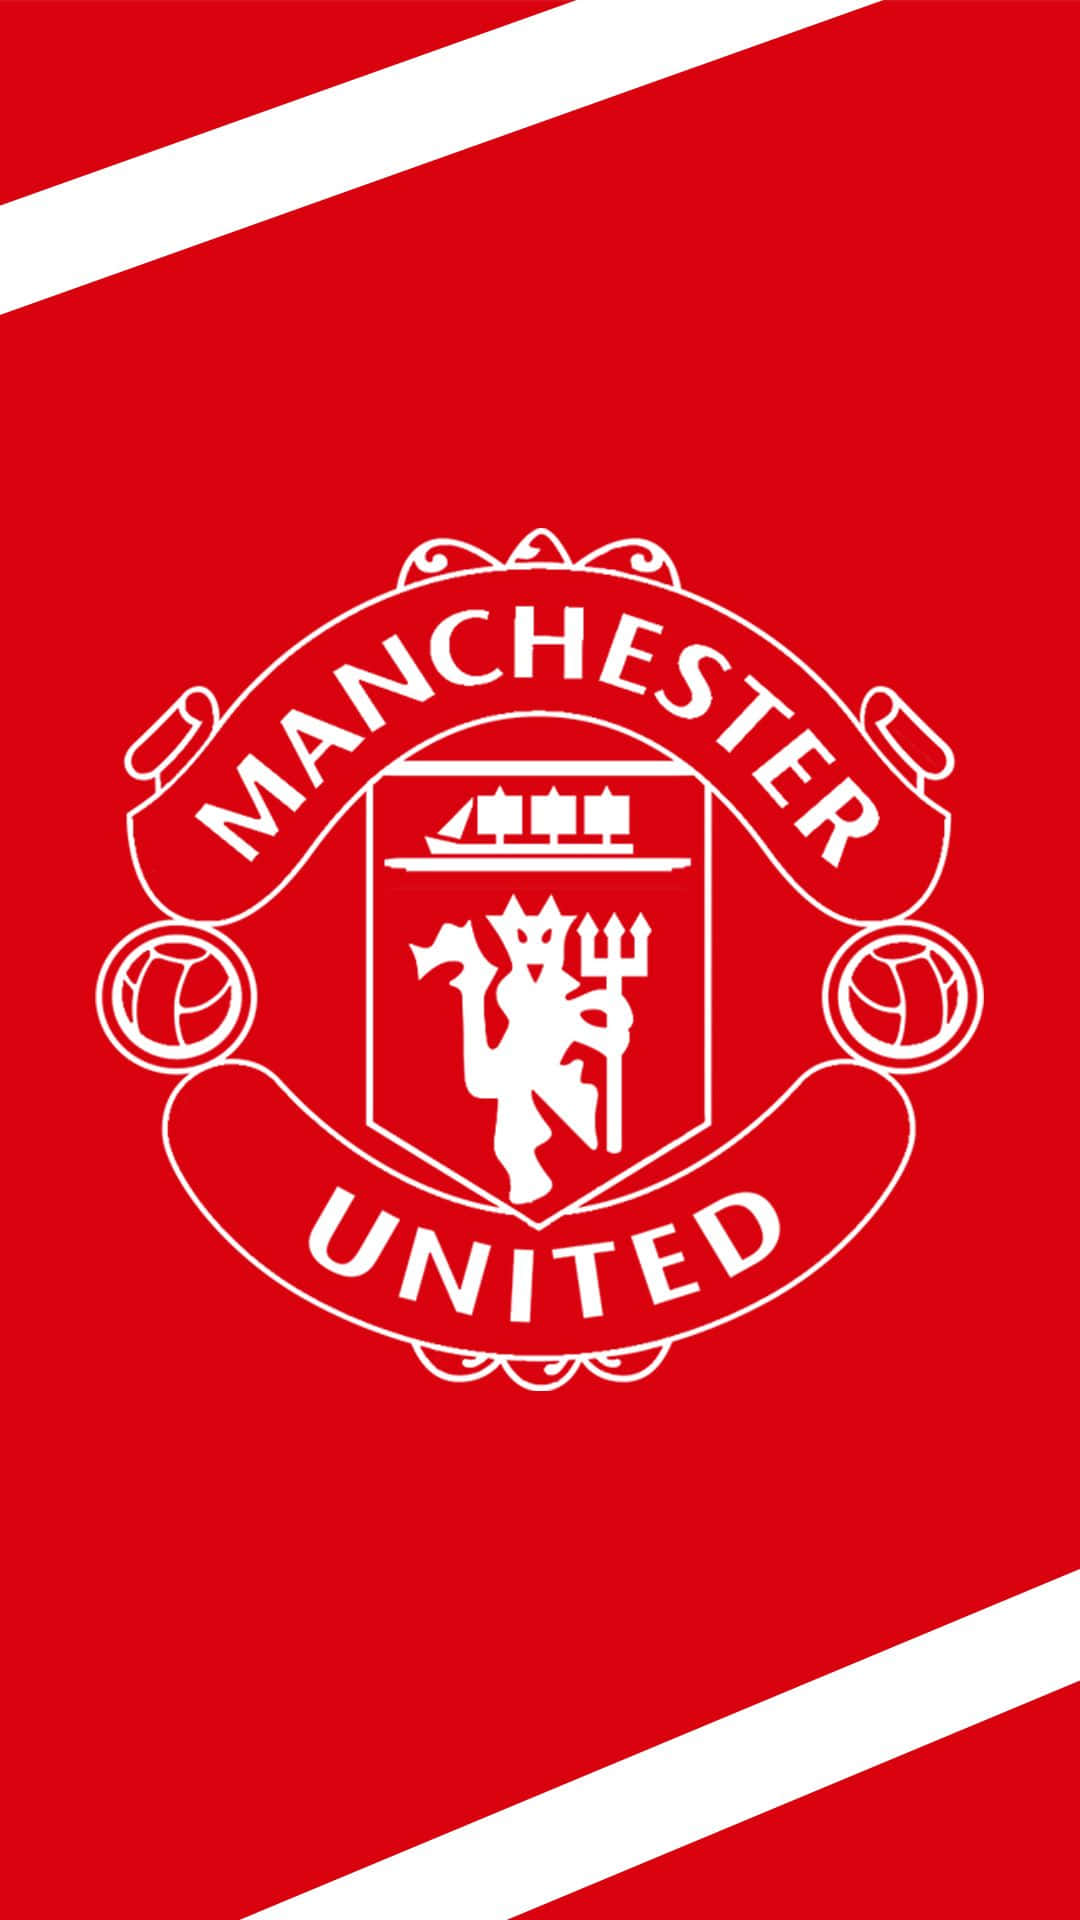 Manchester United Supporters Can Stay Connected With The Latest News And Videos Using Their Manchester United Branded Iphone Background